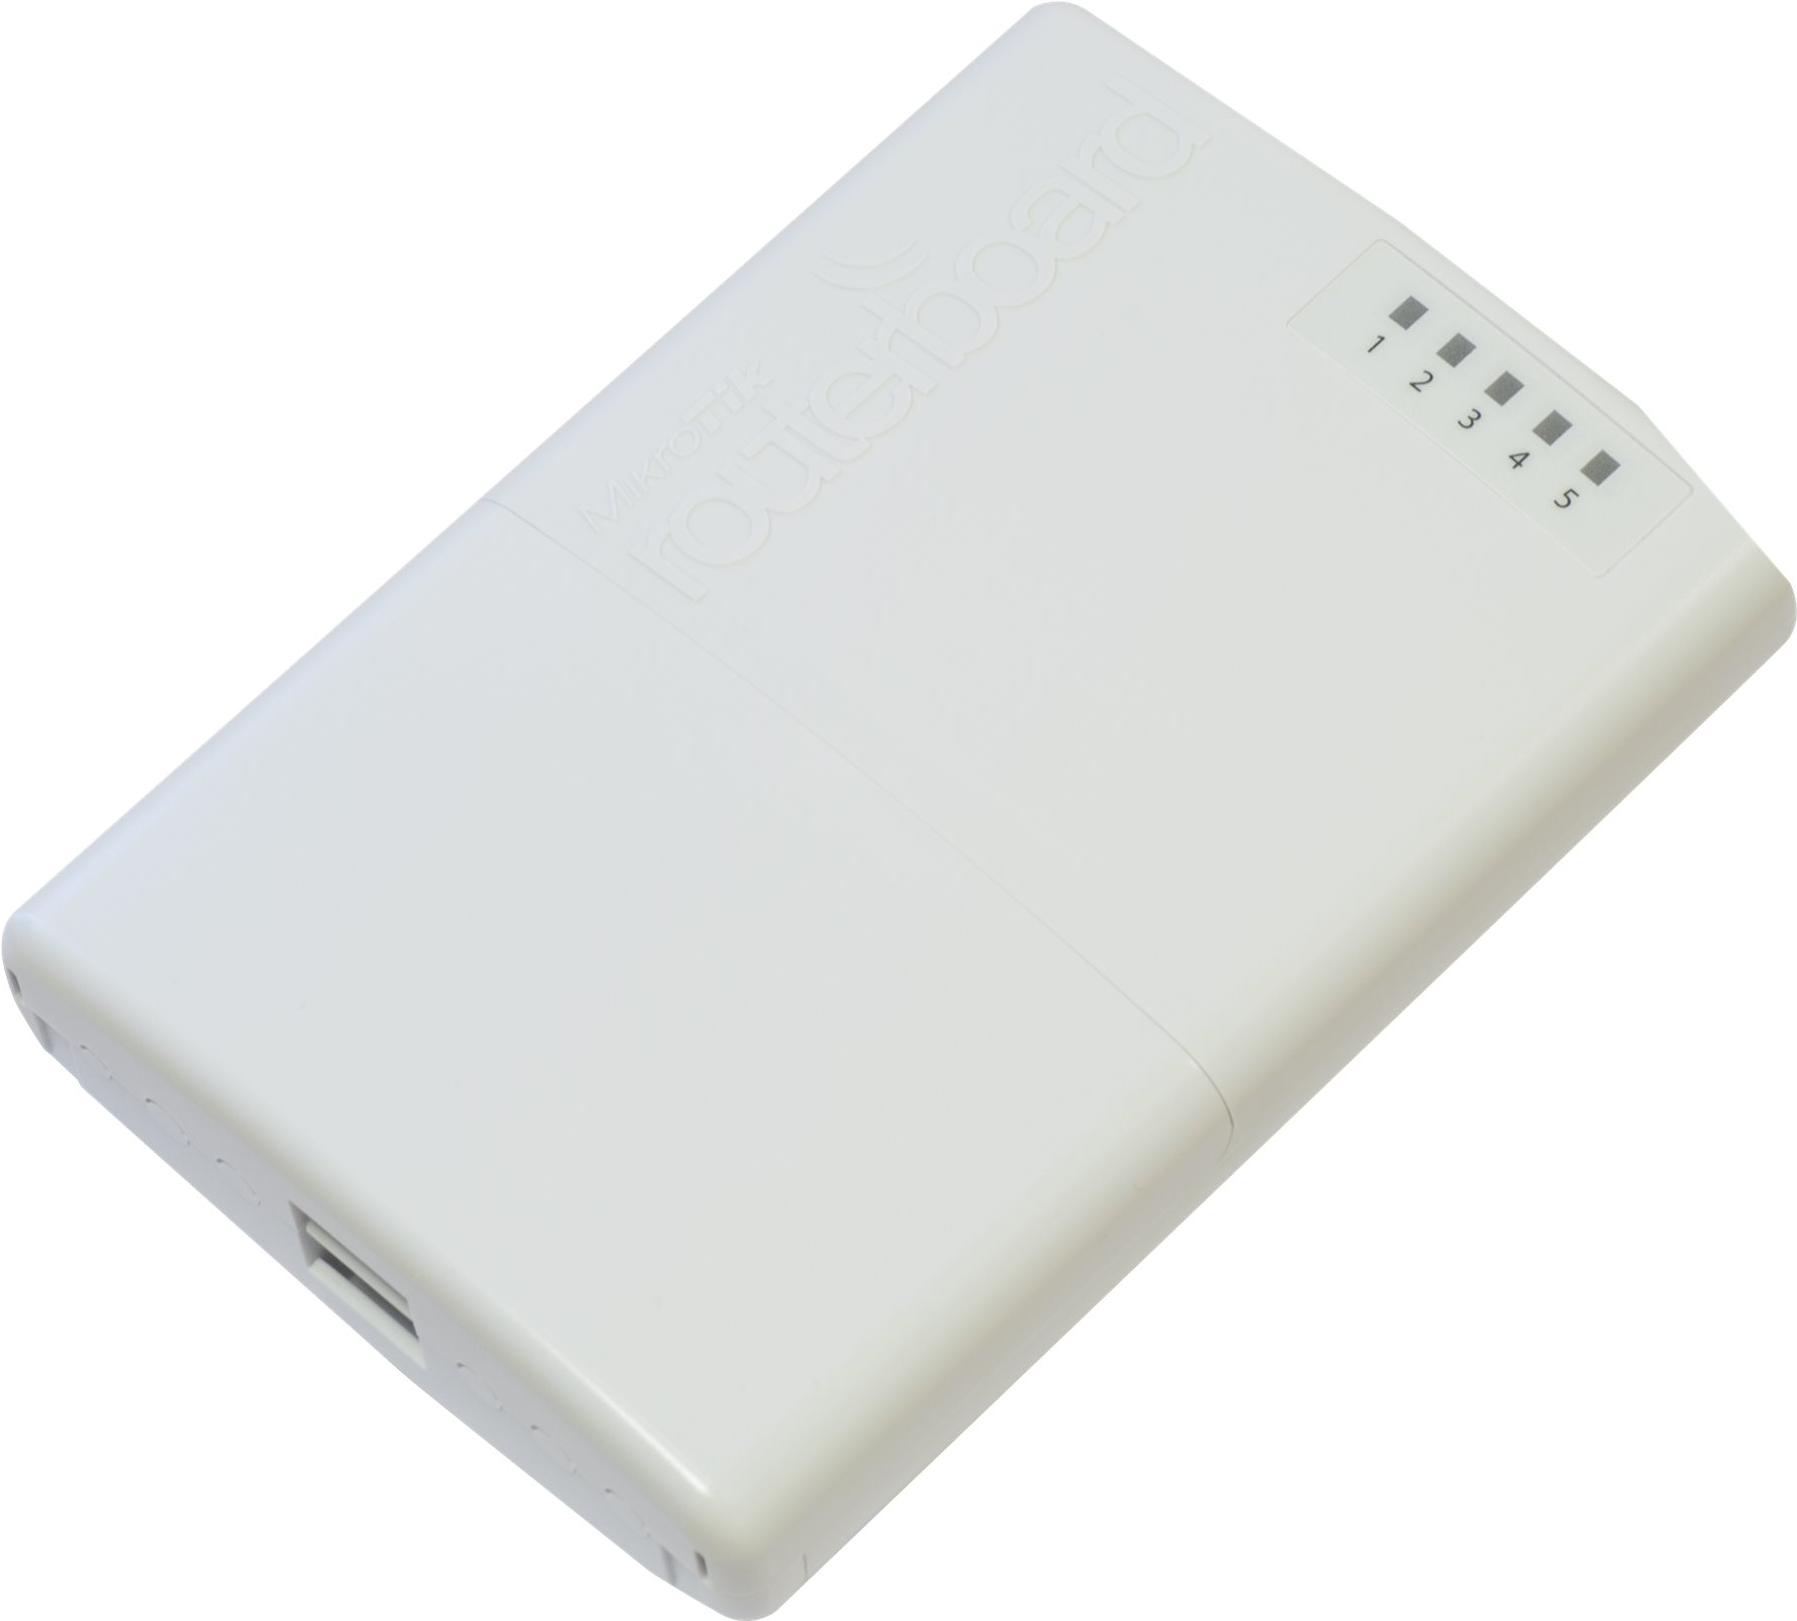 MikroTik PowerBox Outdoor 5x Ethernet port router with PoE output 5V-30V/1-2A (MT RB750P-PB)